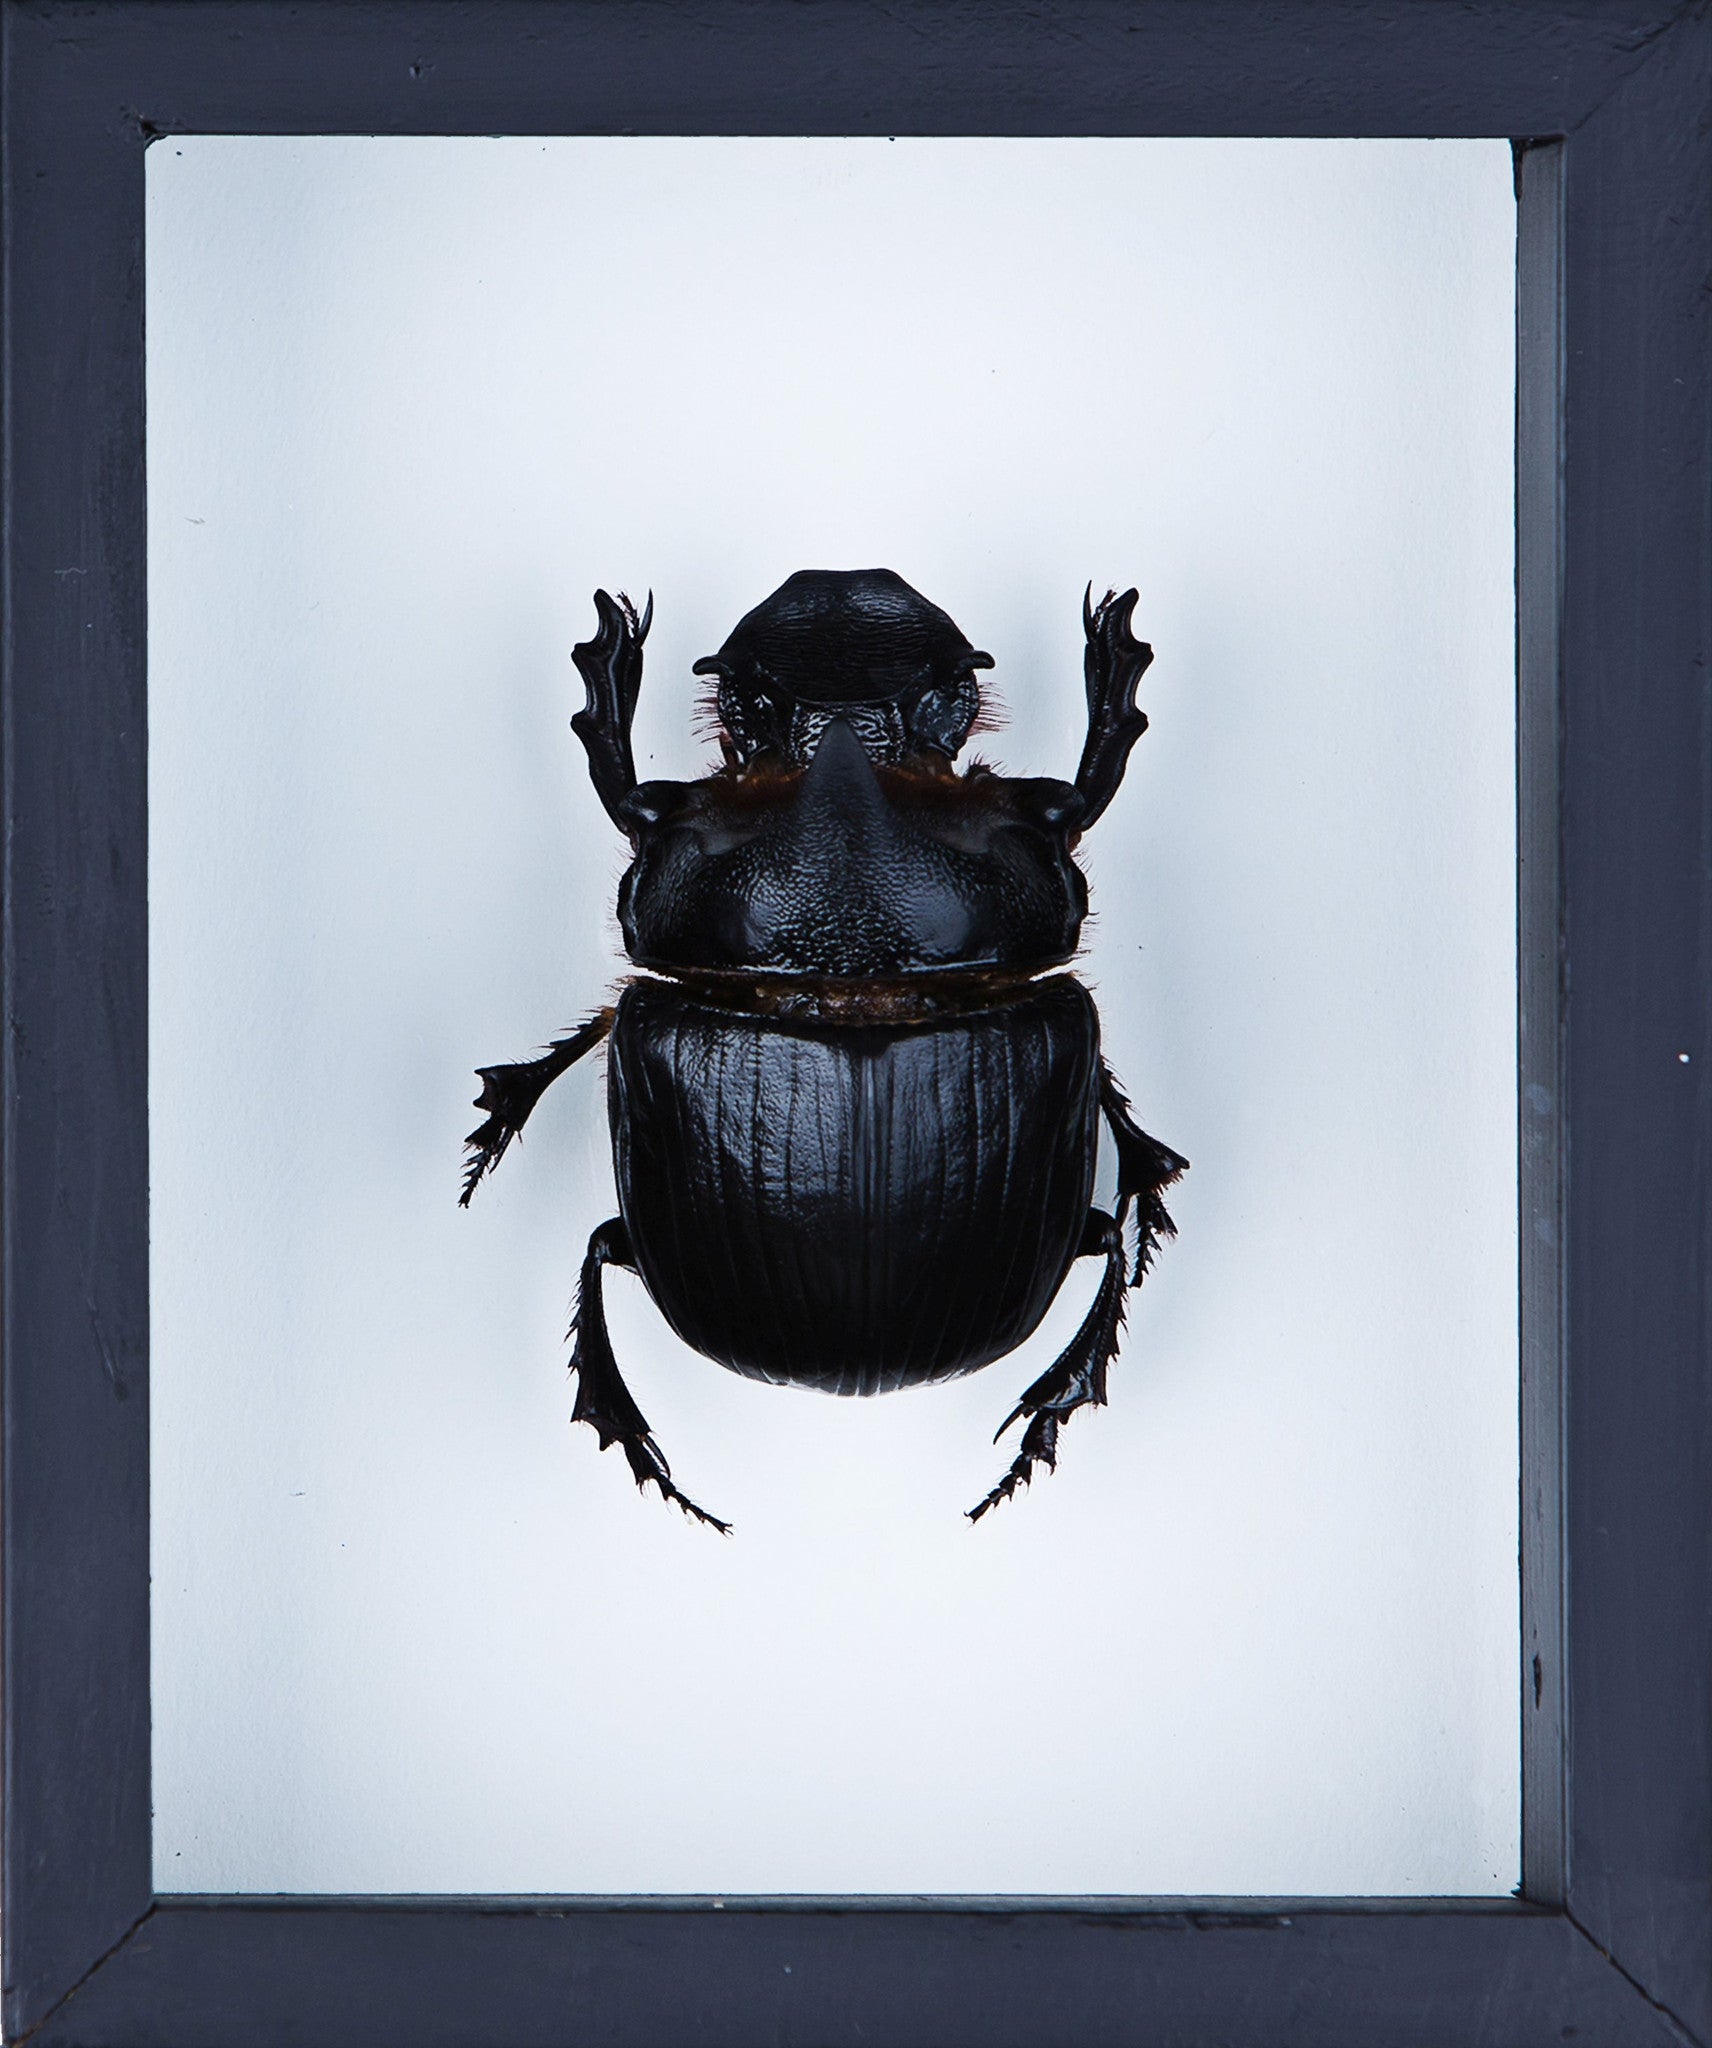 THE ELEPHANT DUNG BEETLE (HELIOCOPRIS DOMINUS) DOUBLE GLASS FRAME 6 x 5 IN